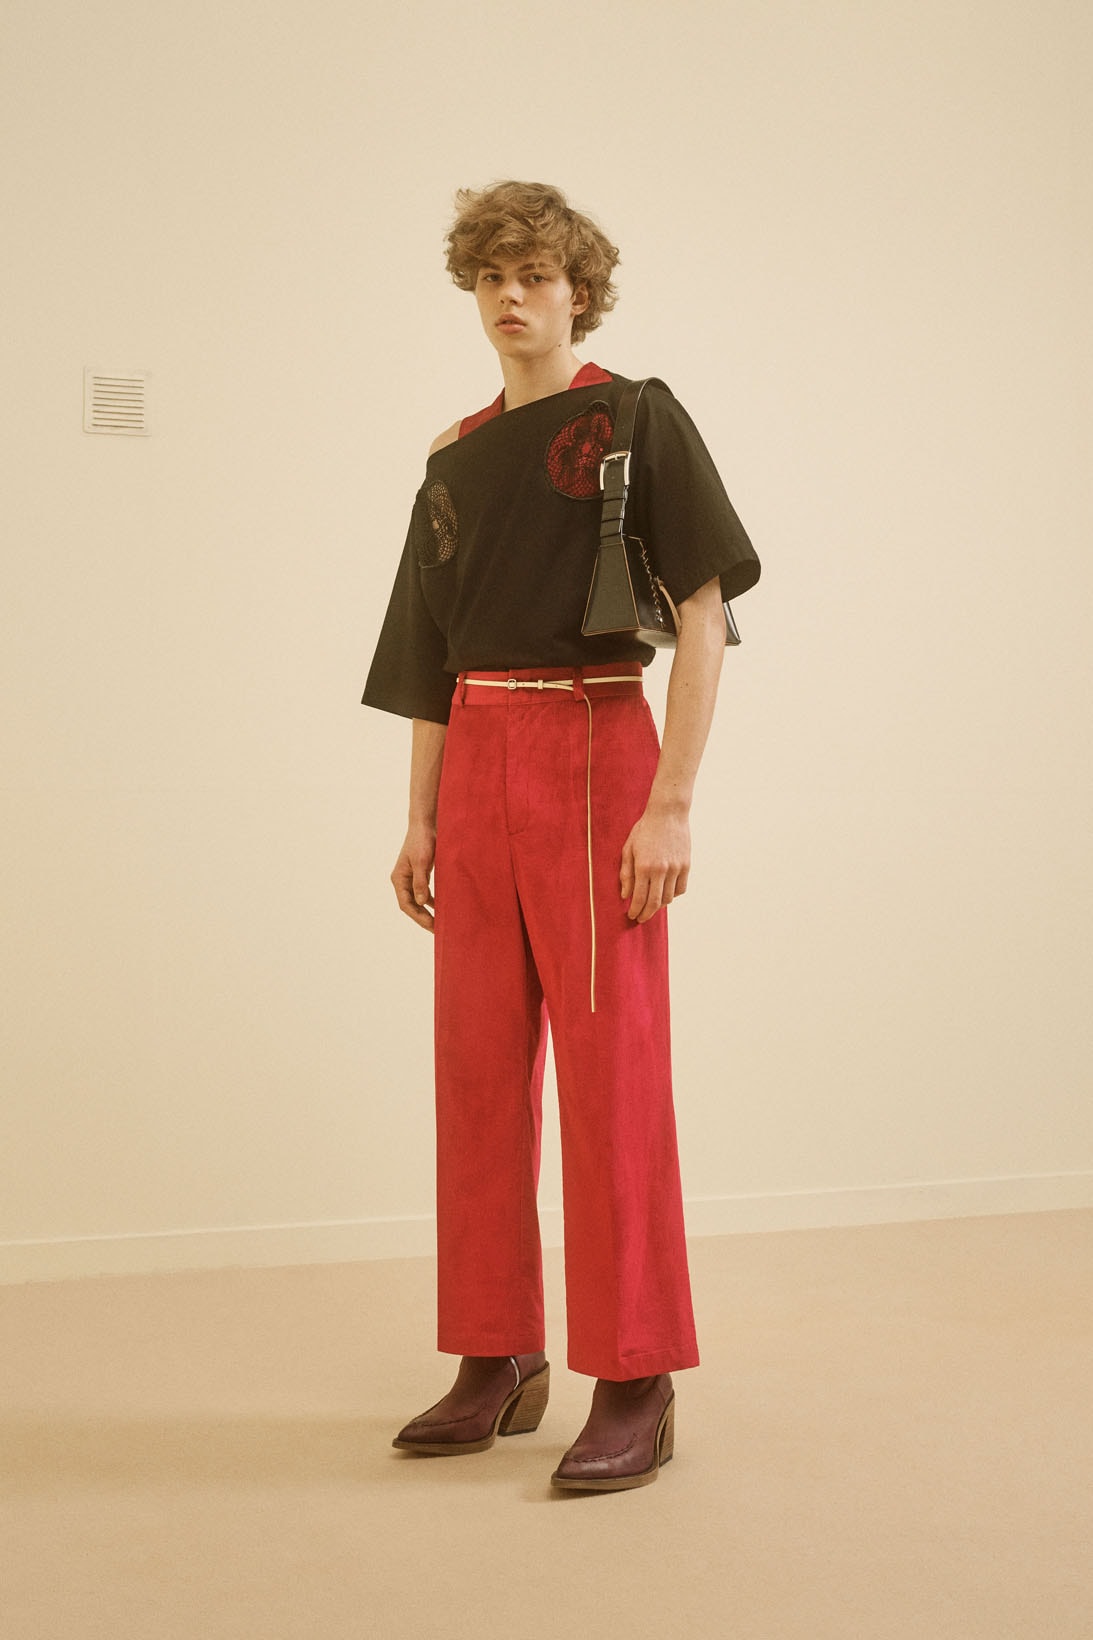 acne studios menswear fall winter 2021 fw21 collection lookbook t-shirt pants red